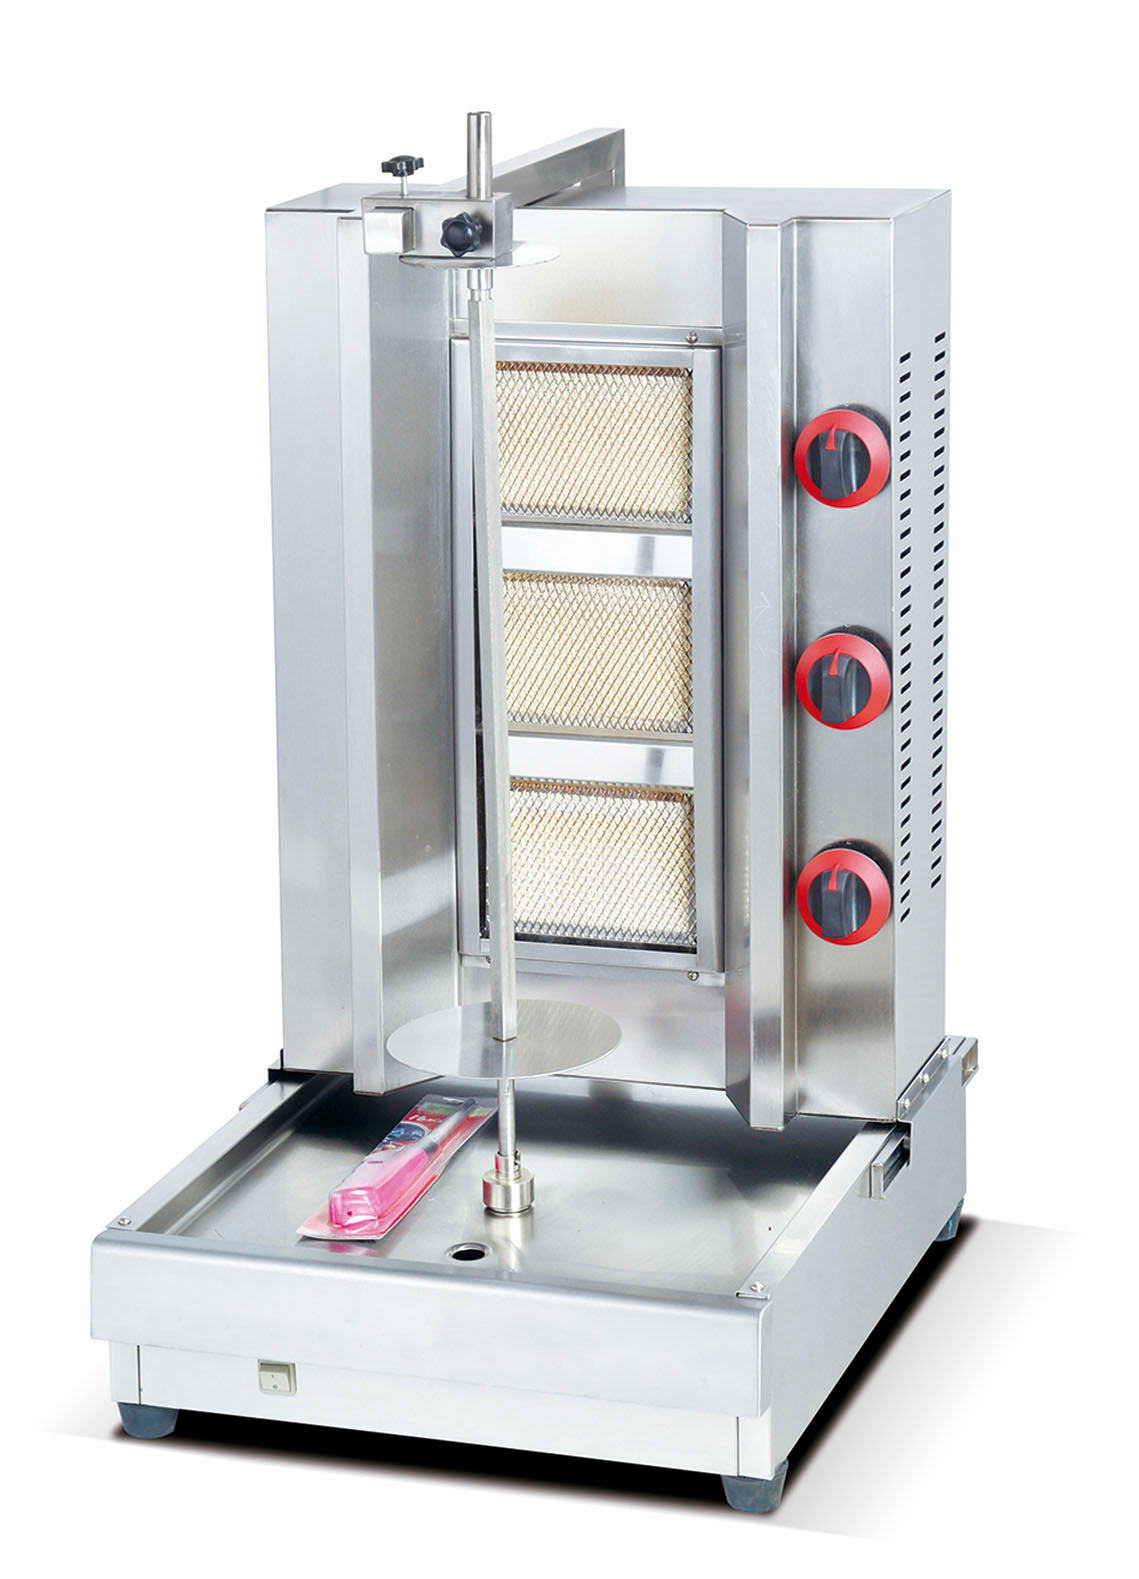 TB-8800 Gas Middle East barbecue, Brazil barbecue, Turkey barbecue, rice dressing machine